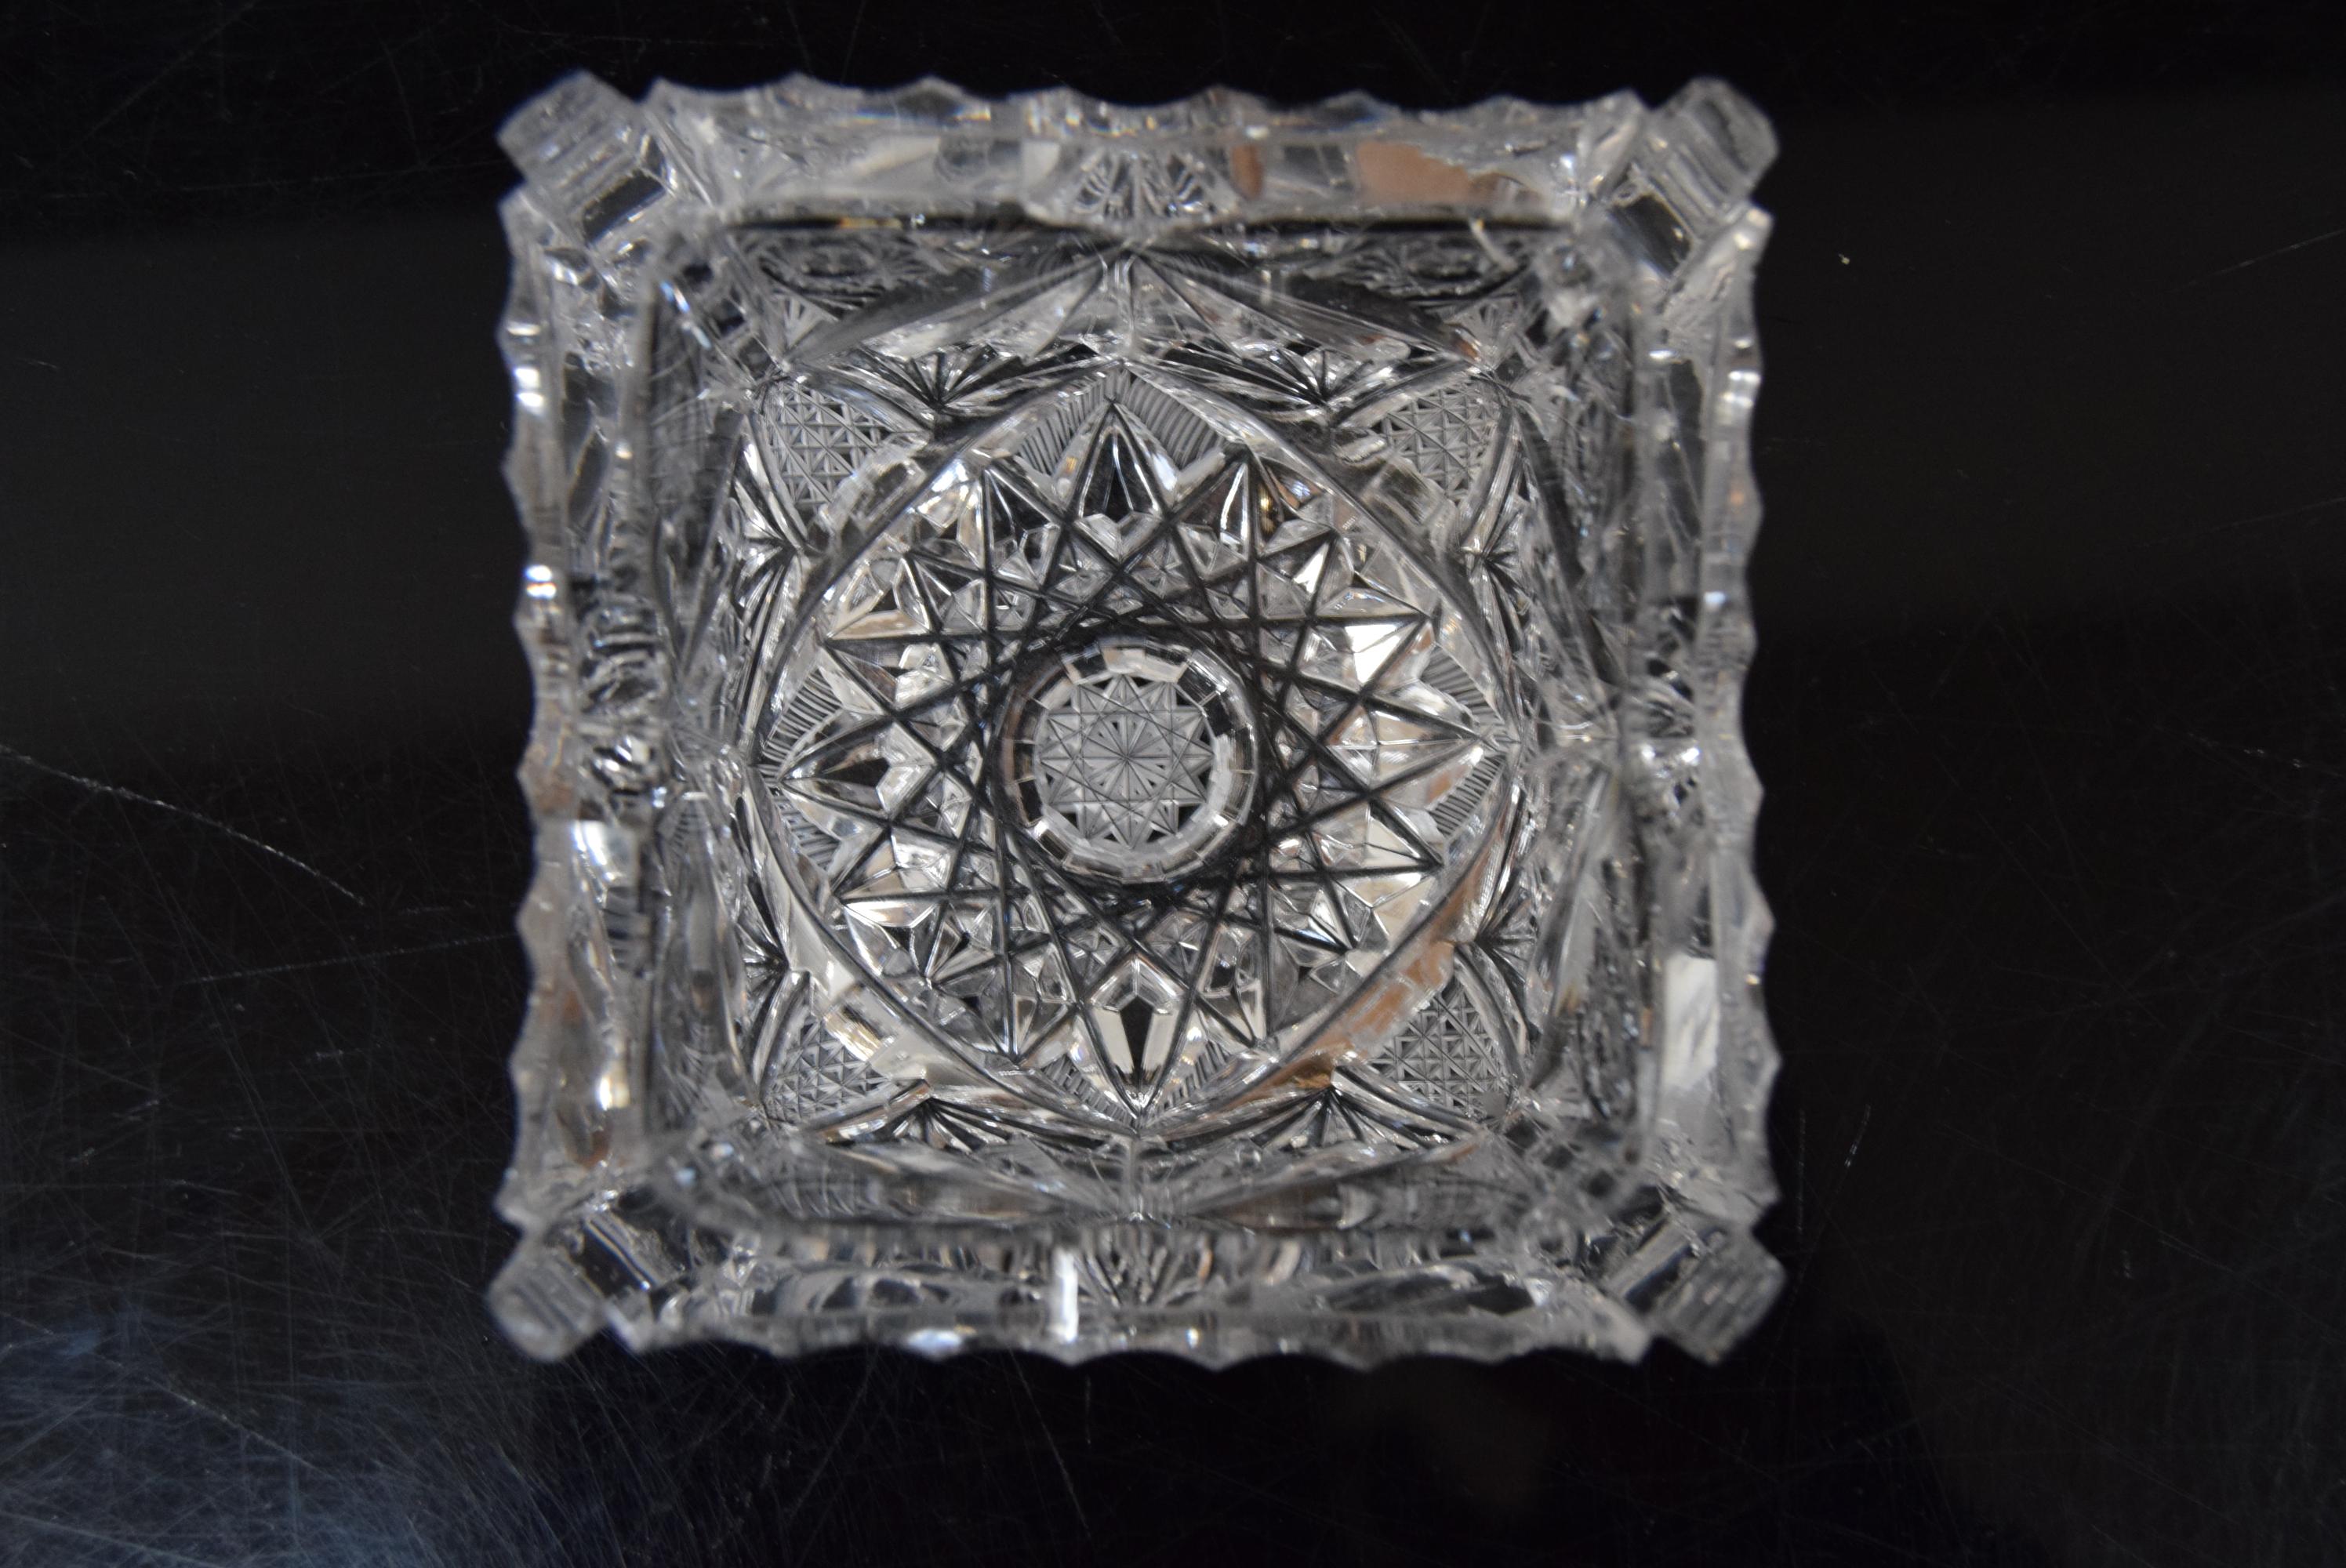 Pair of Rare Vintage Ashtrays, Cut Crystal Glass, Bohemia in the, 1960s For Sale 5